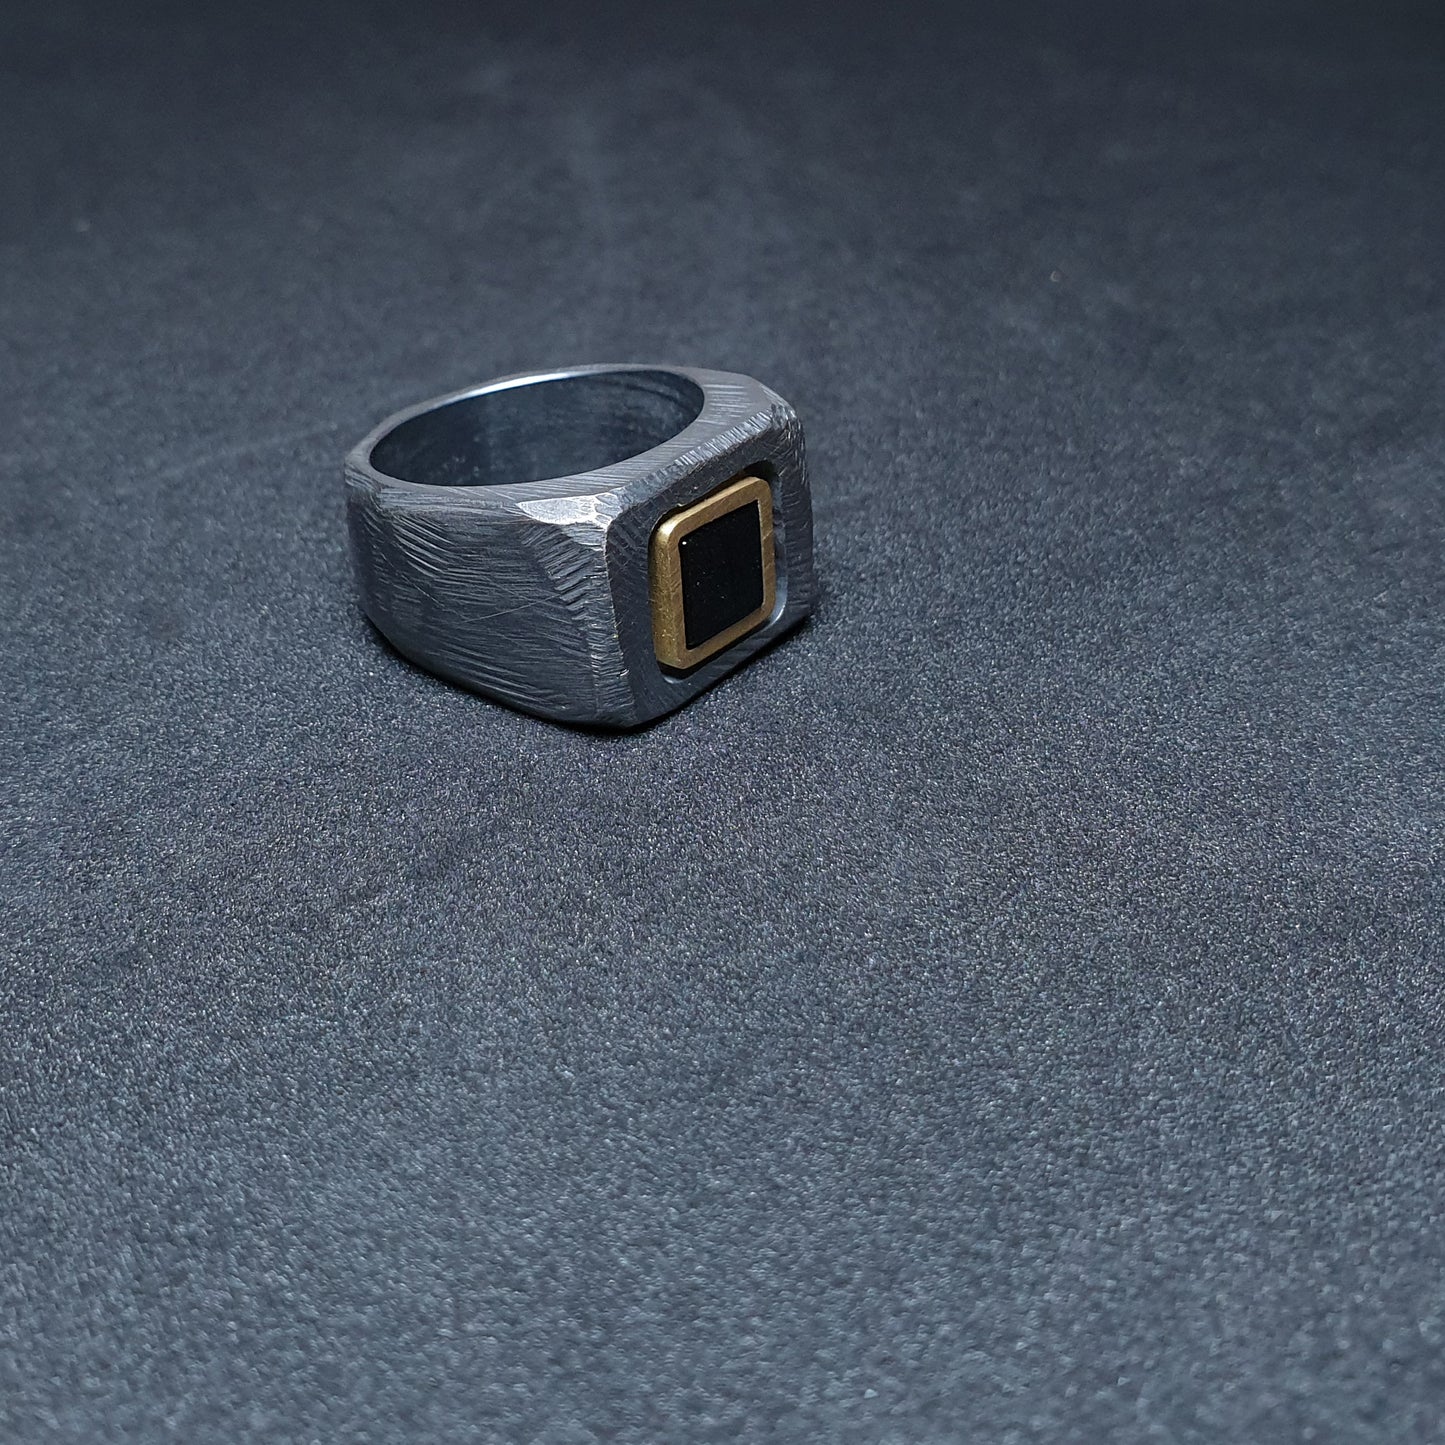 Ring from the squaRes collection